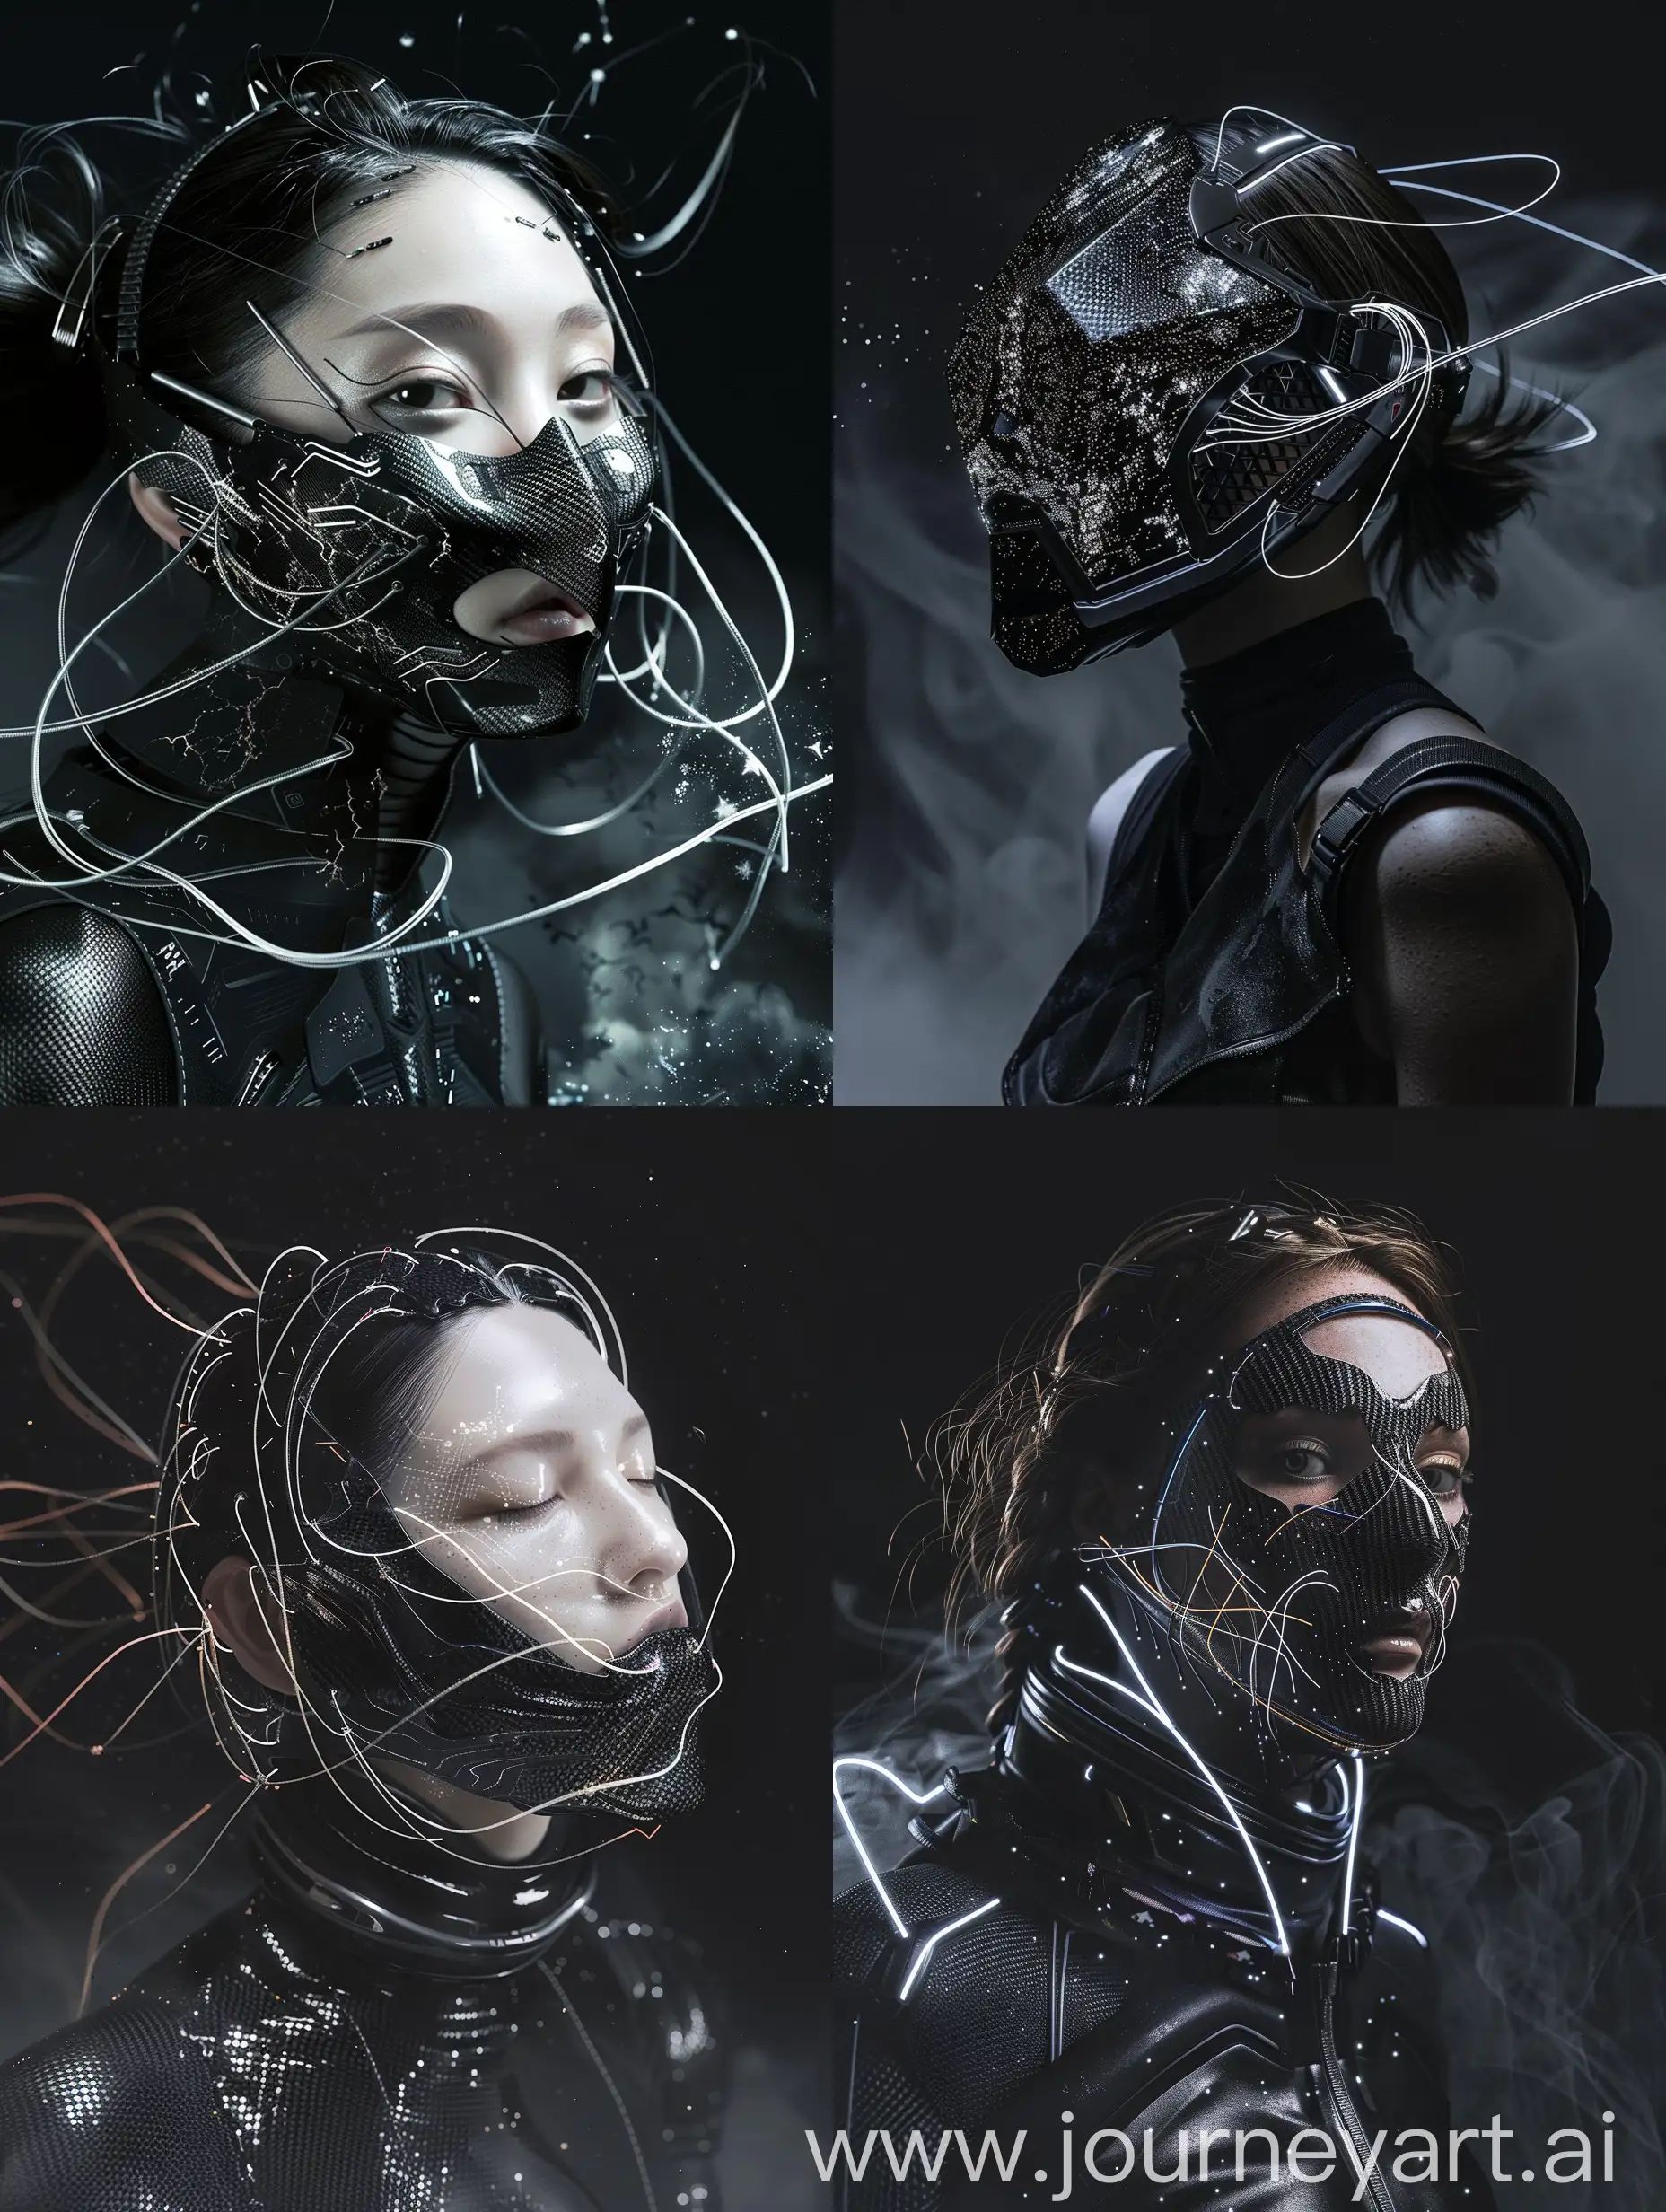 Cosmic-Explorer-with-Cybernetic-Mask-and-Zero-Gravity-Movements